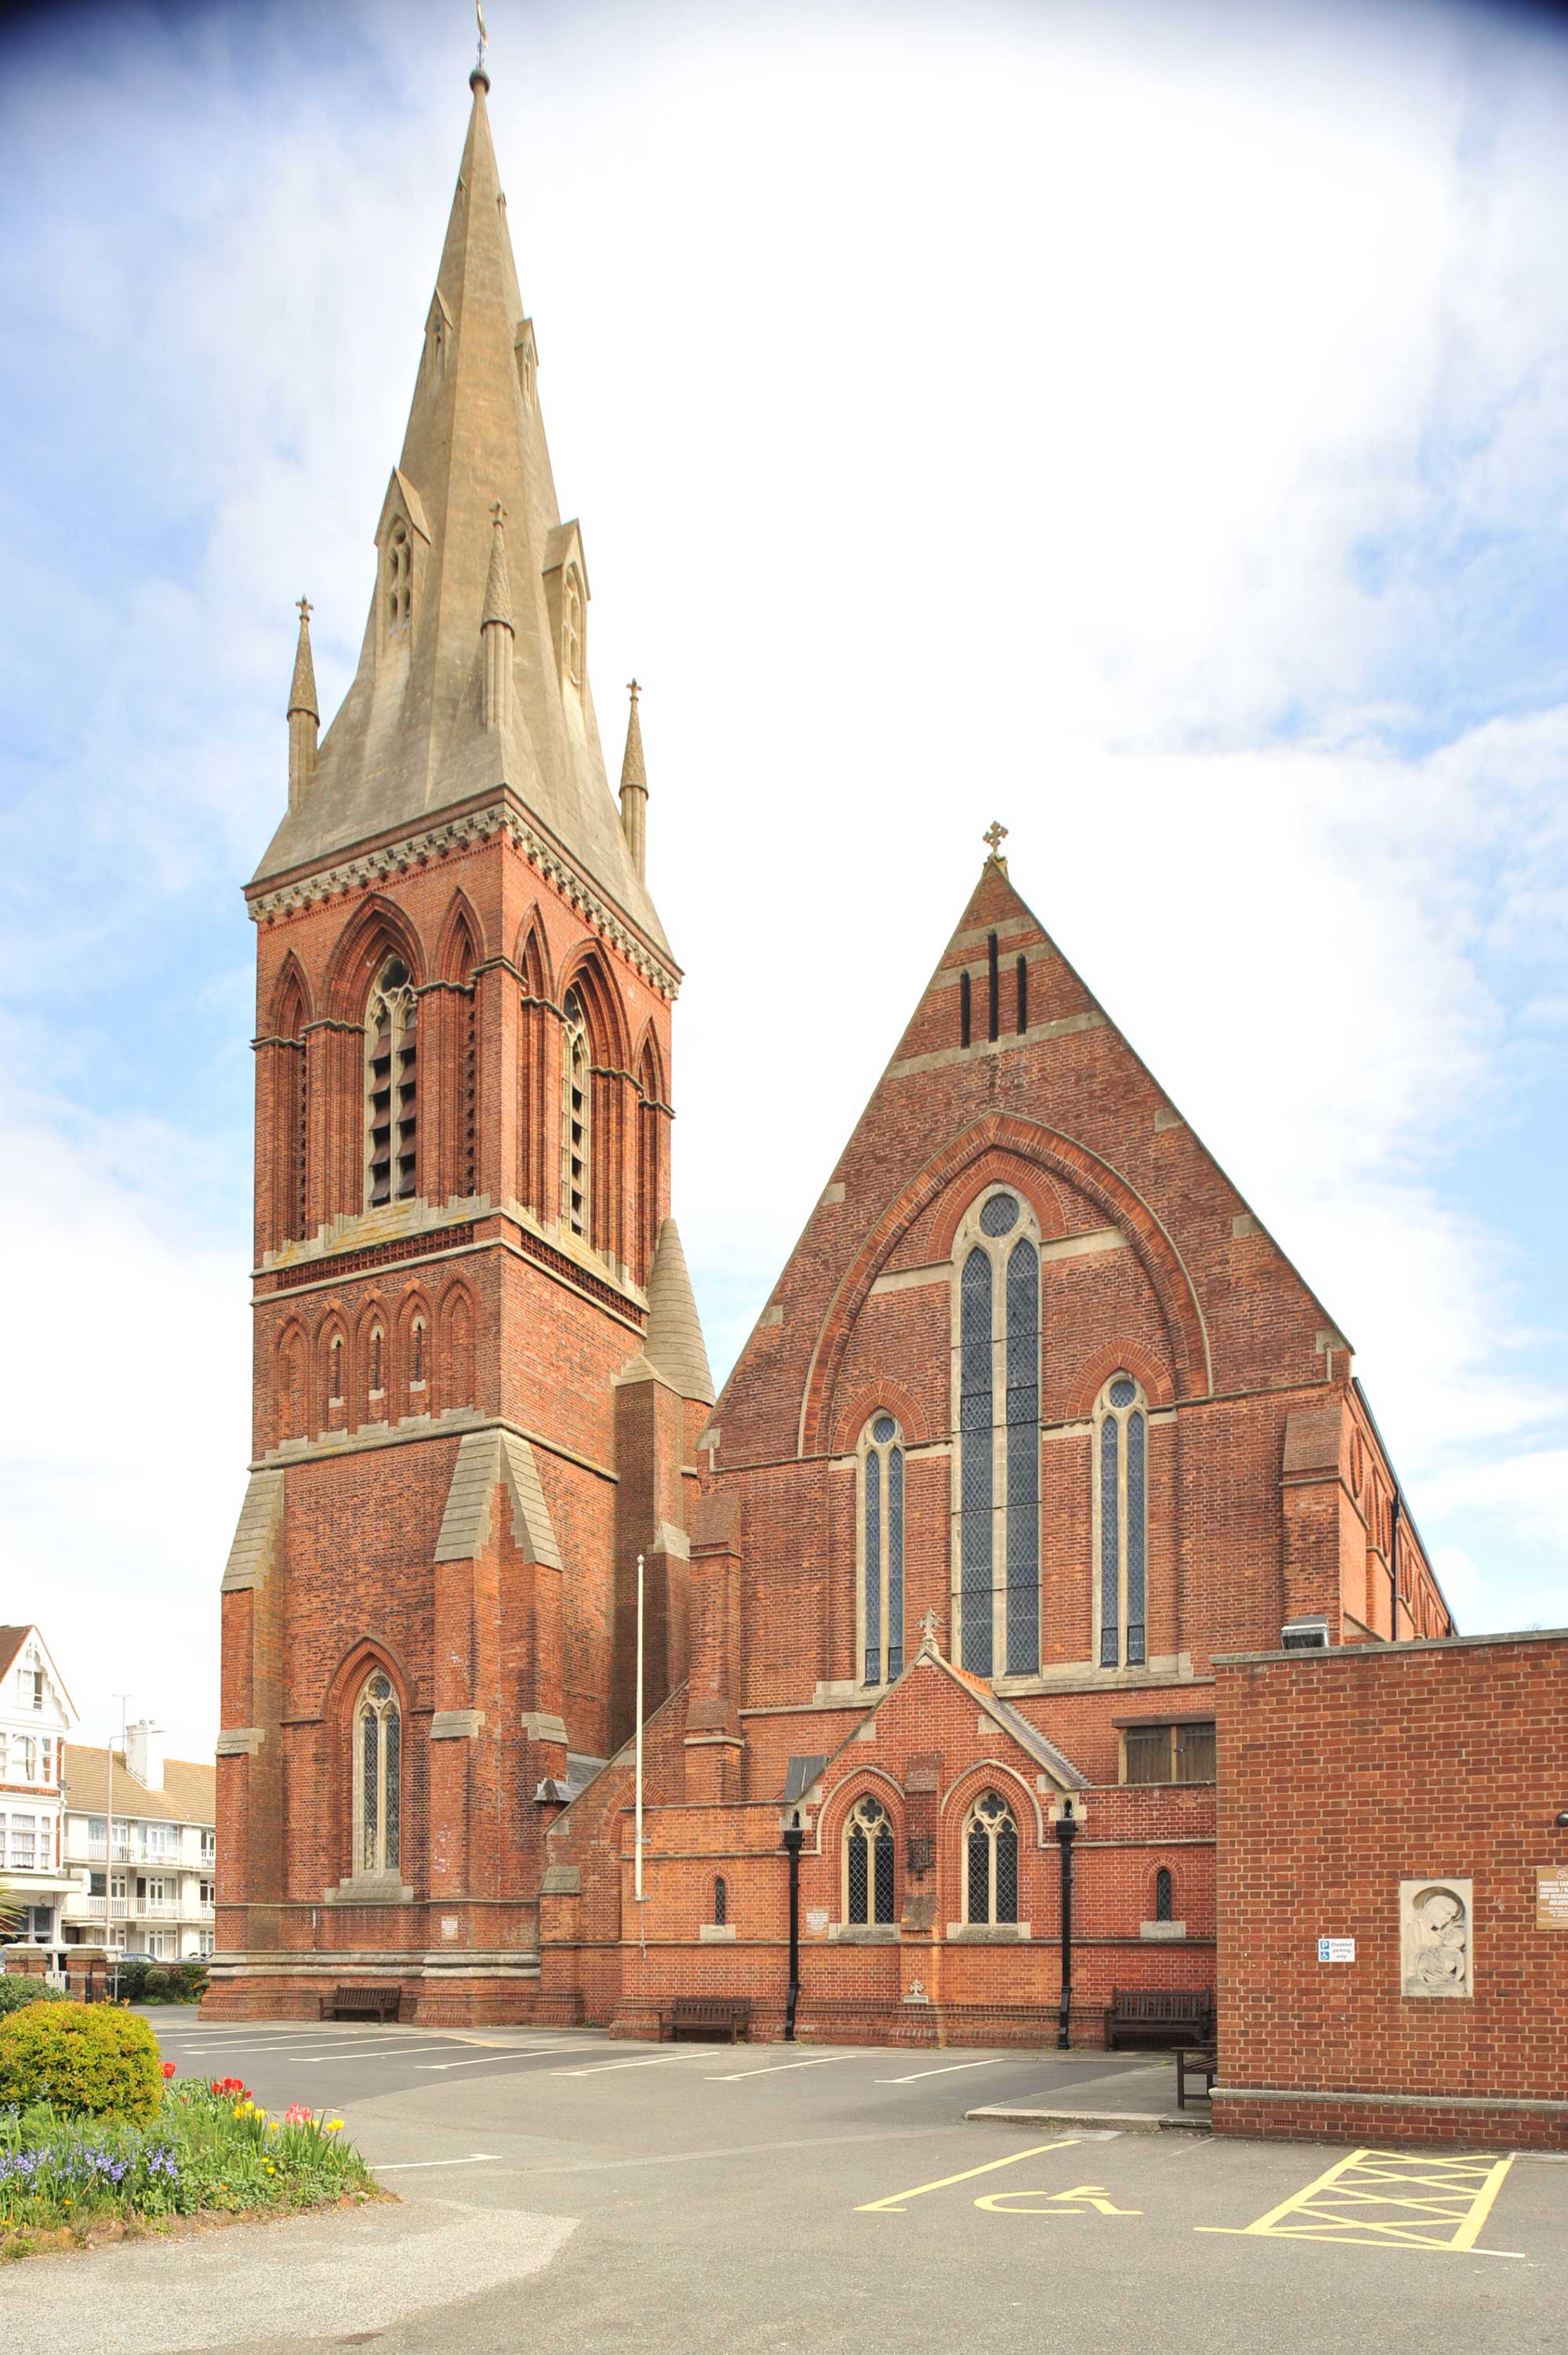 Red brick church with stone highlights and a stone spire with small windows.